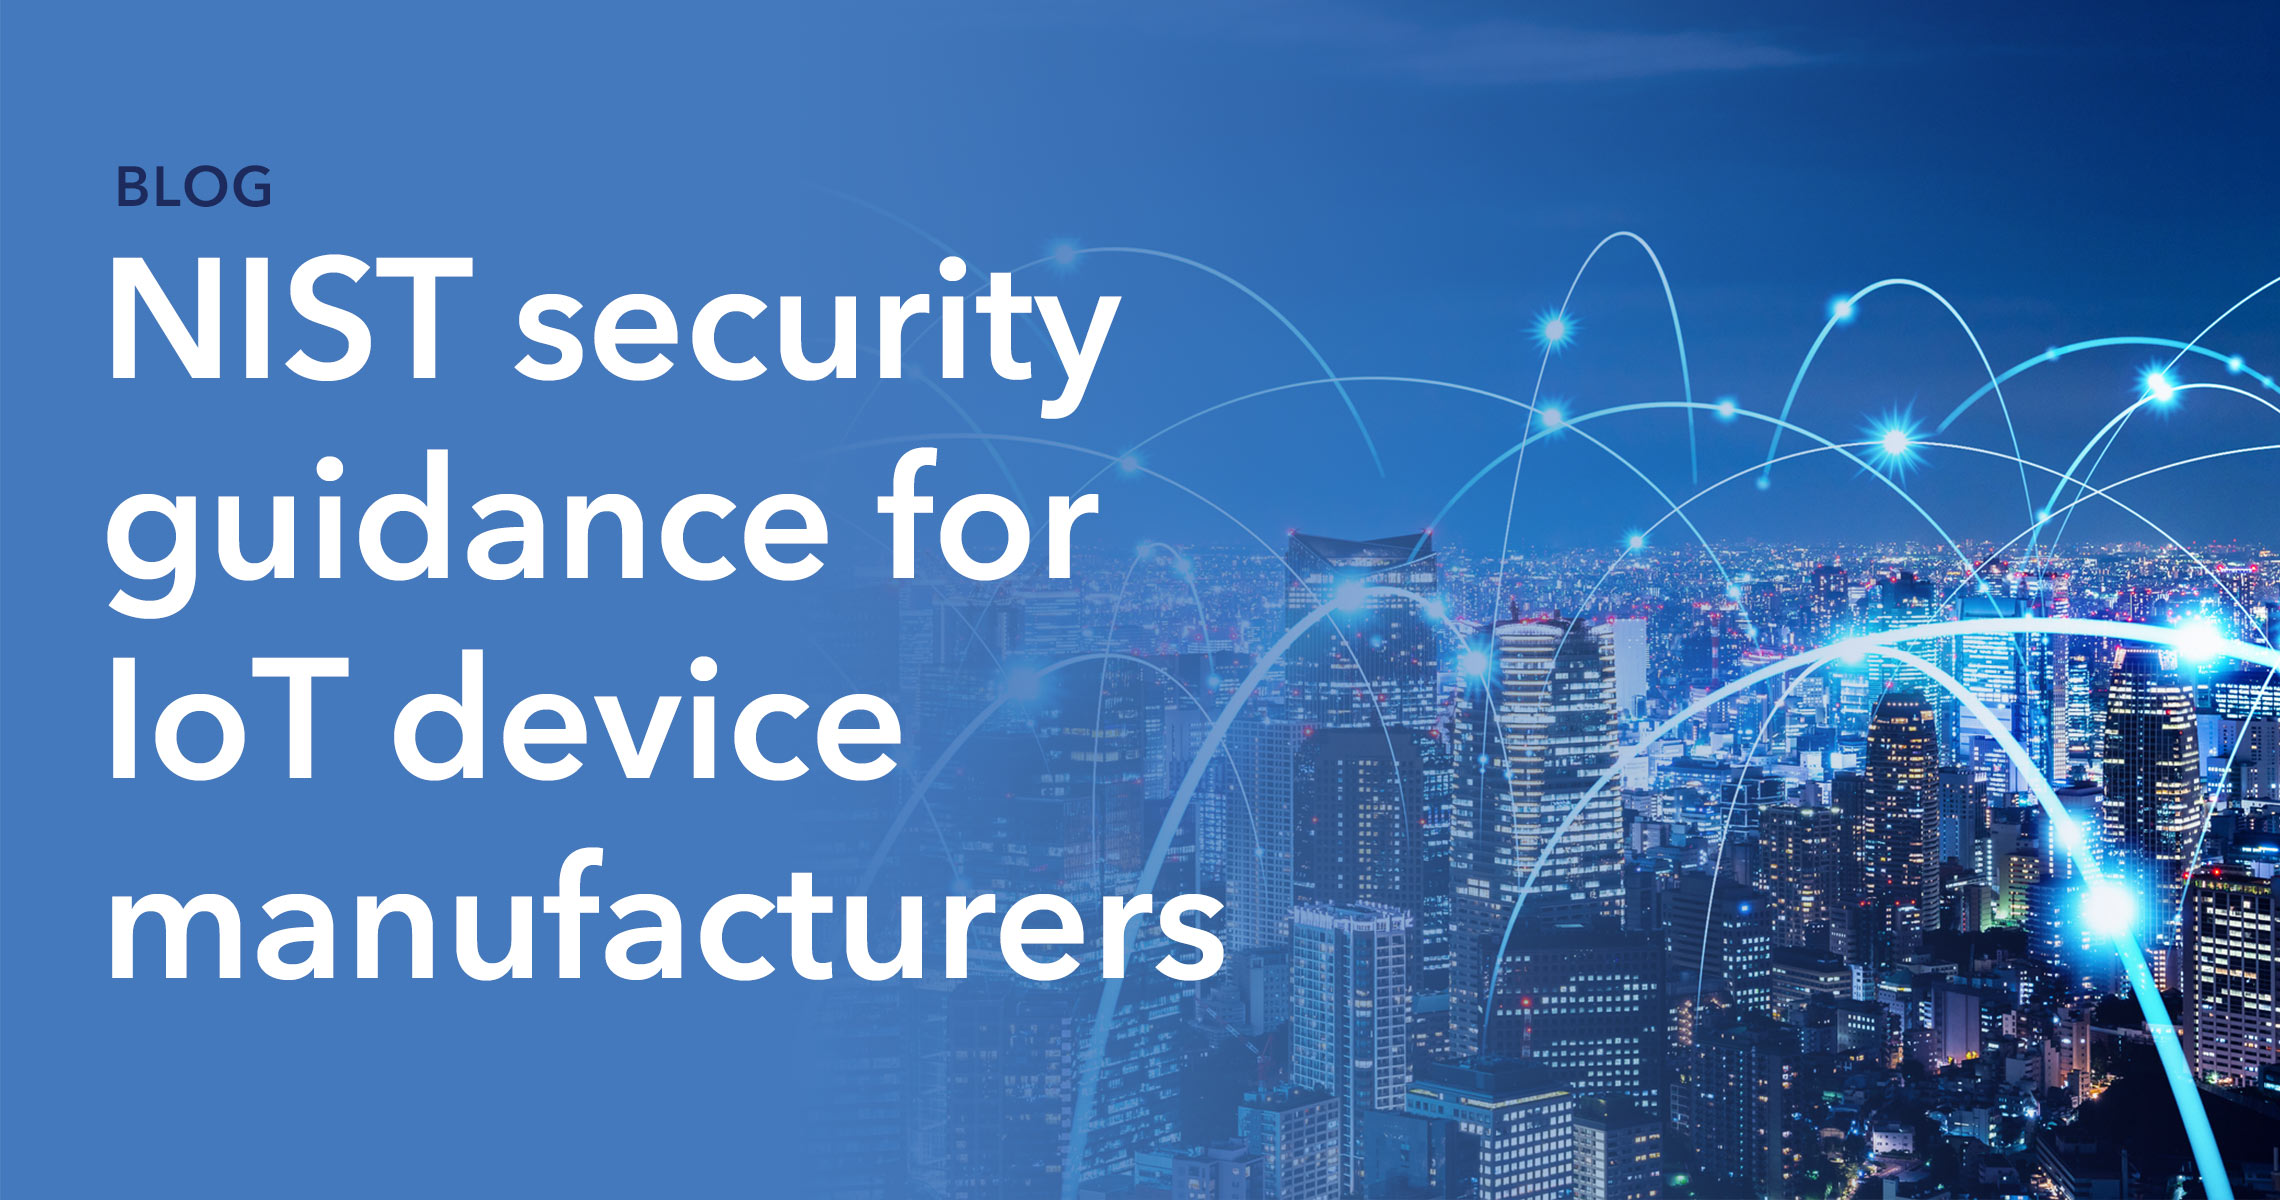 Blog_Banner_NIST-security-guidance-for-IoT-device manufacturers_B_2280x1200